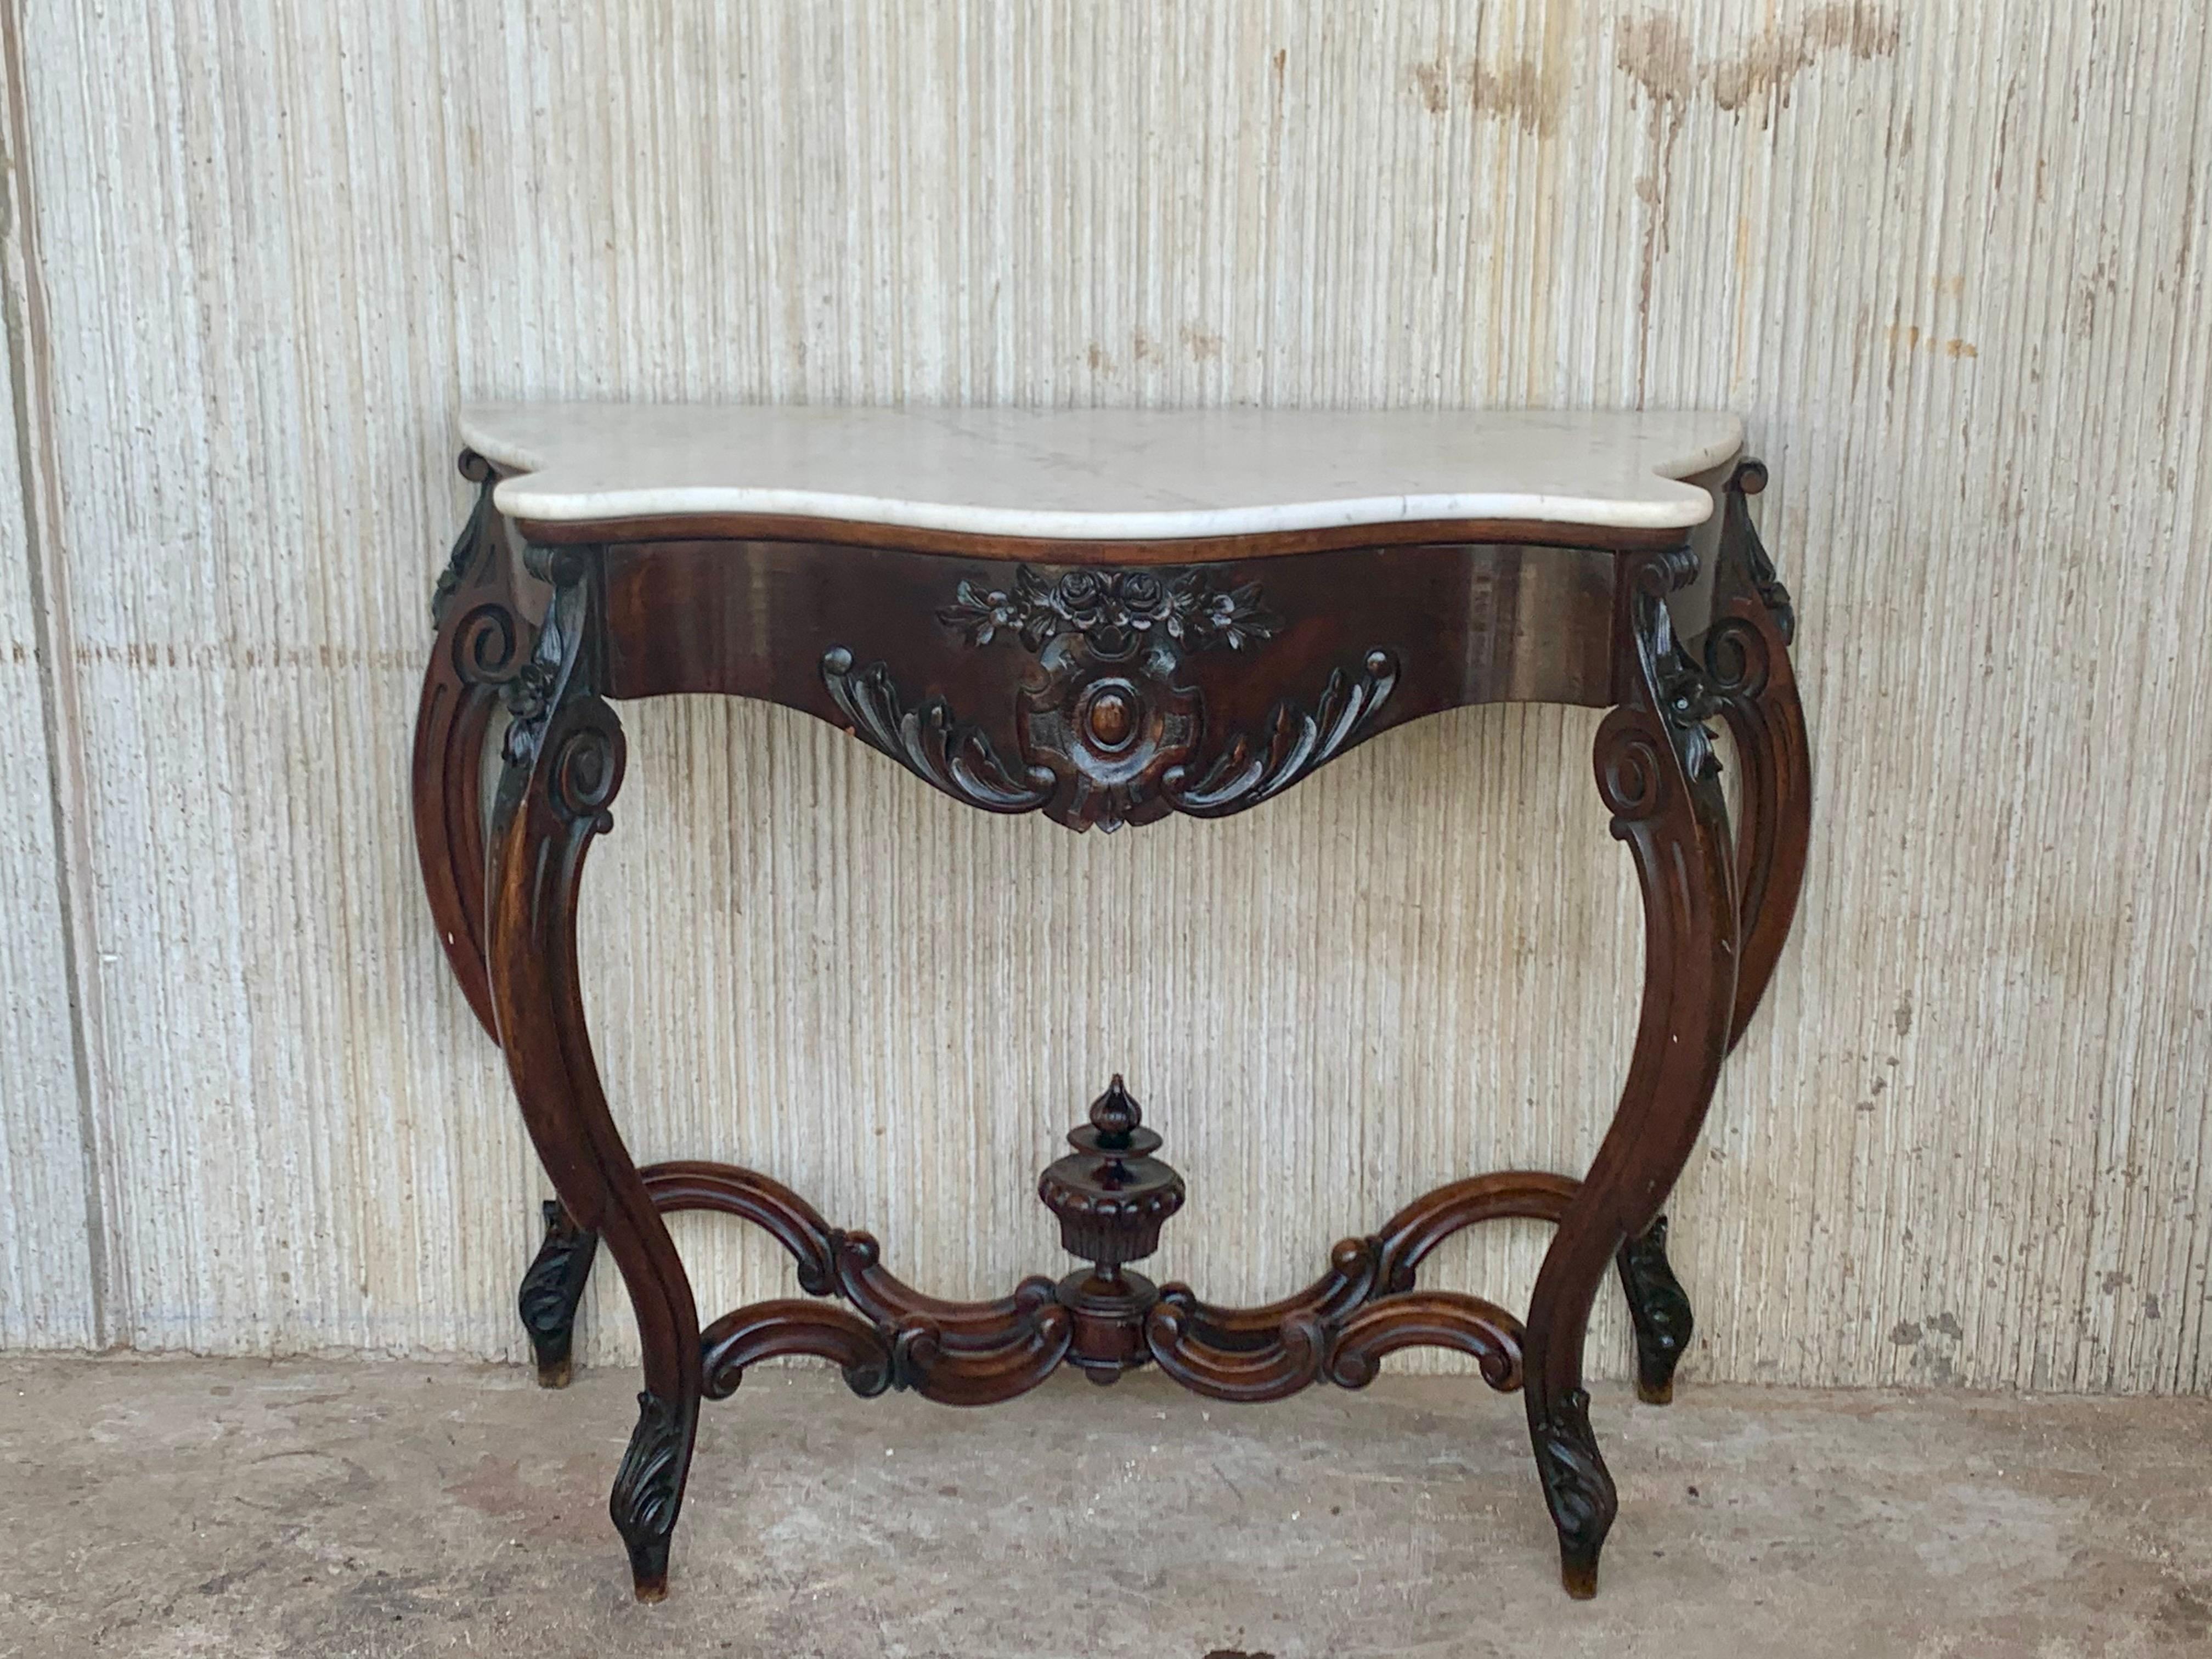 19th French Regency carved walnut console table with drawer & marble top

19th century French Regence style beautifully carved with leaves walnut console. White cream marble top with front drawer, over hand-carved frieze supported by four cabriole